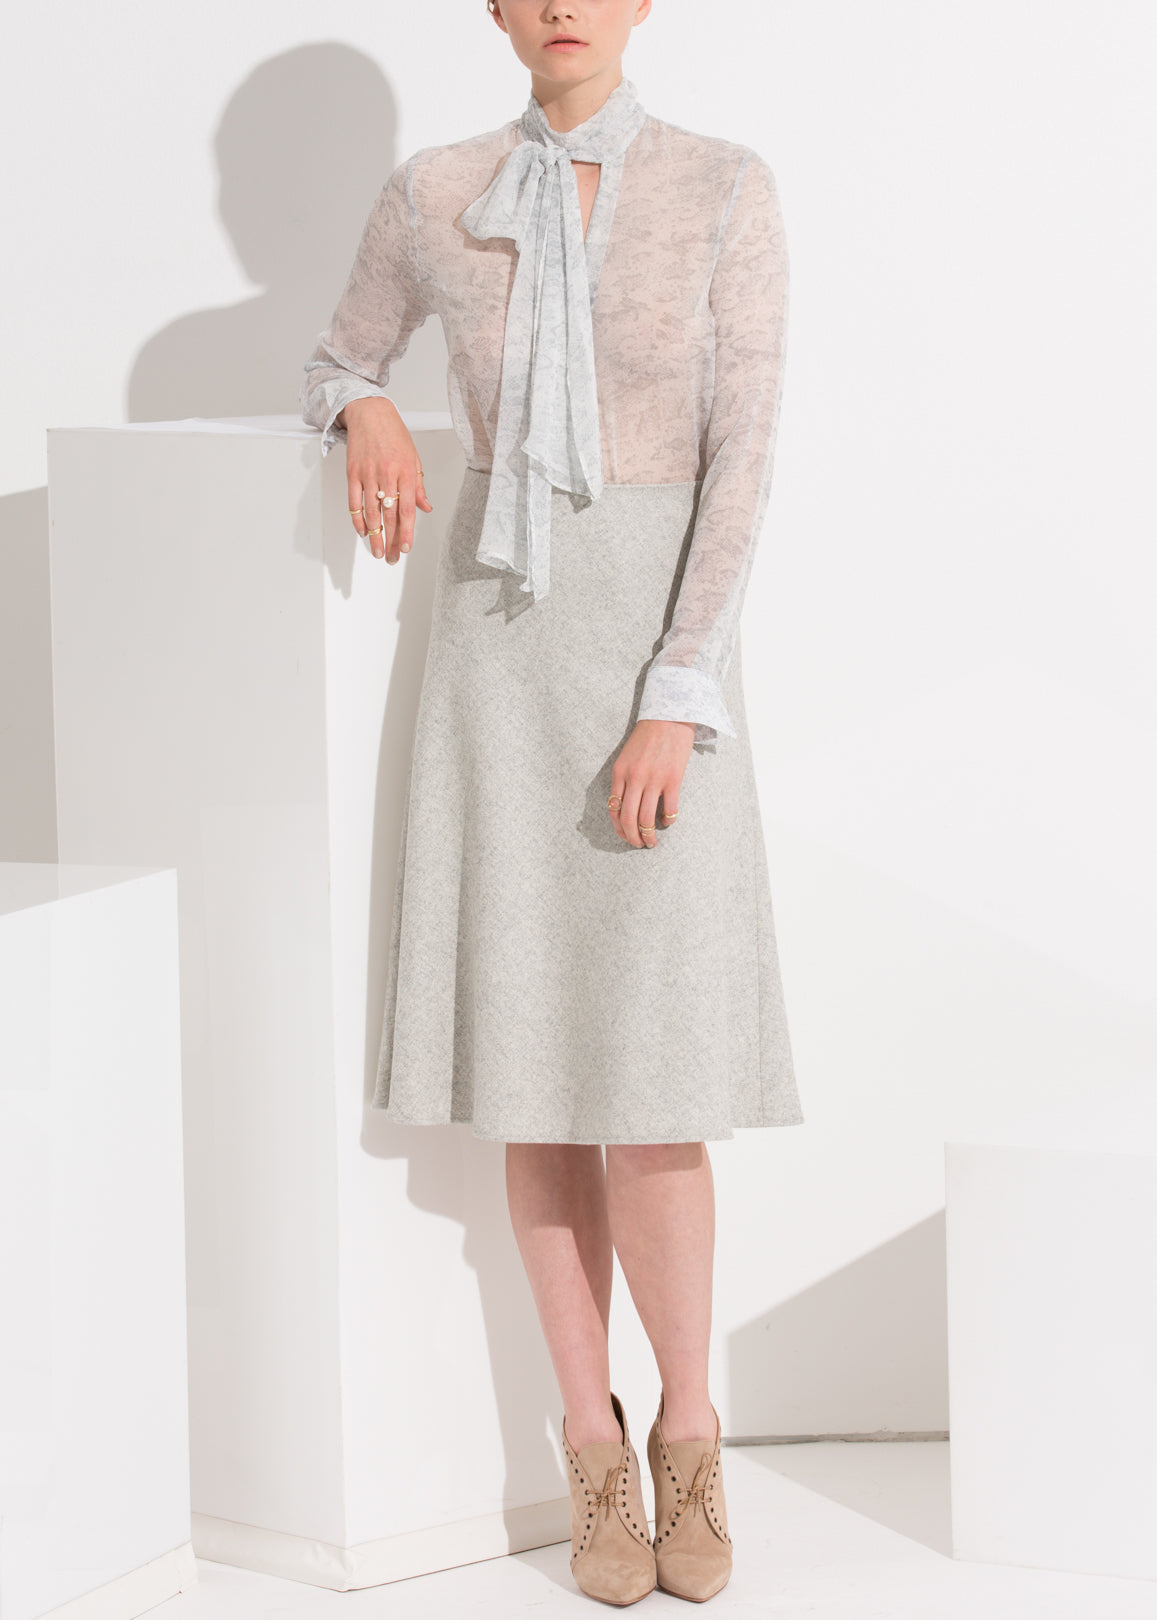 Buy High Waisted Wool Knit Midi Skirt In Heather Grey by Shop at Konus